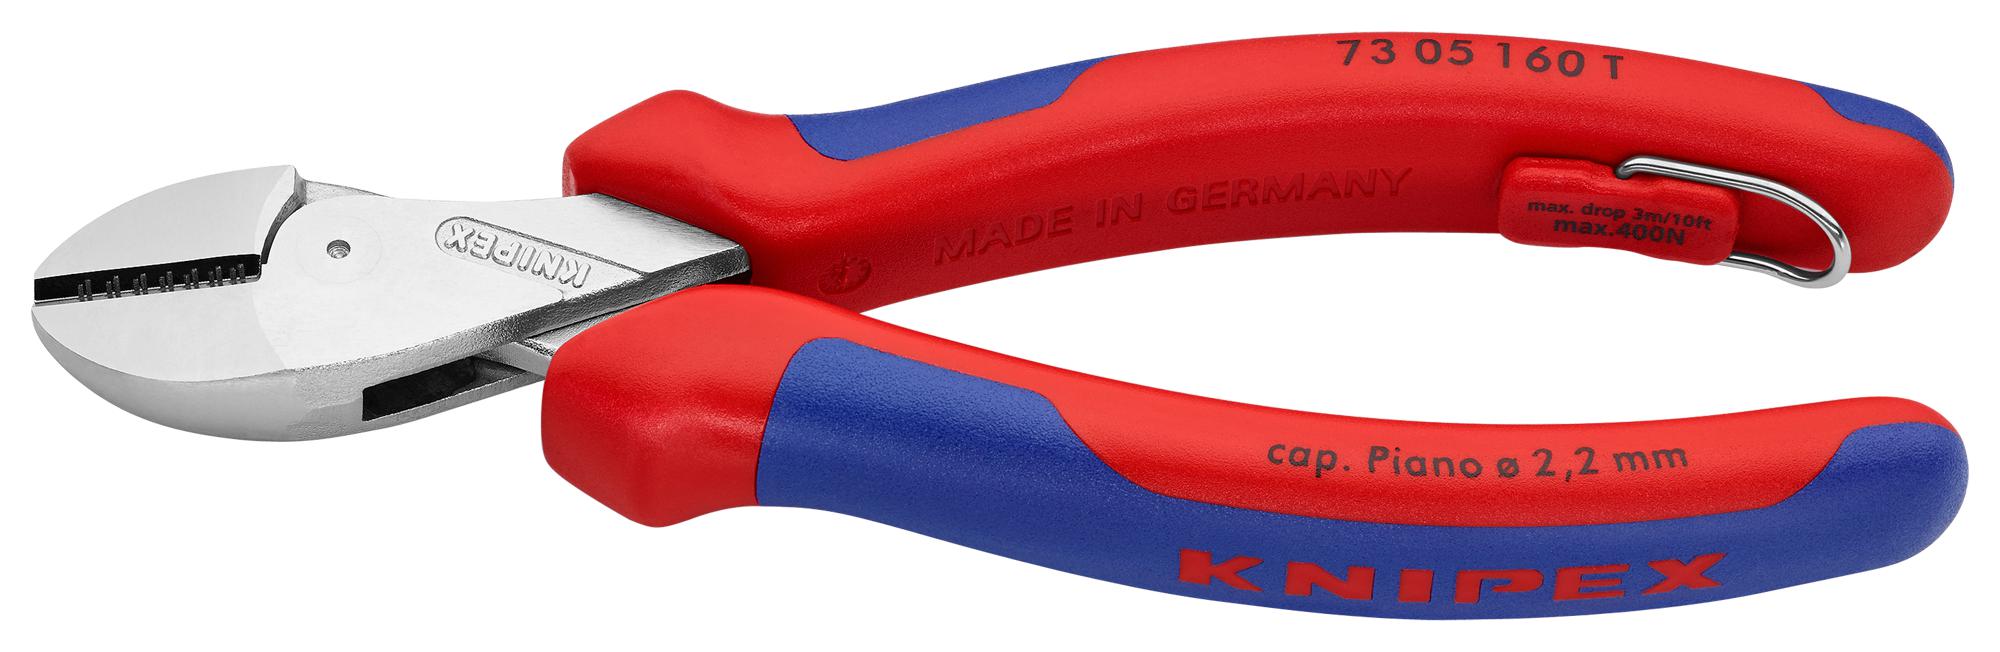 73 05 160 T COMPACT DIAGONAL CUTTER, 160MM KNIPEX